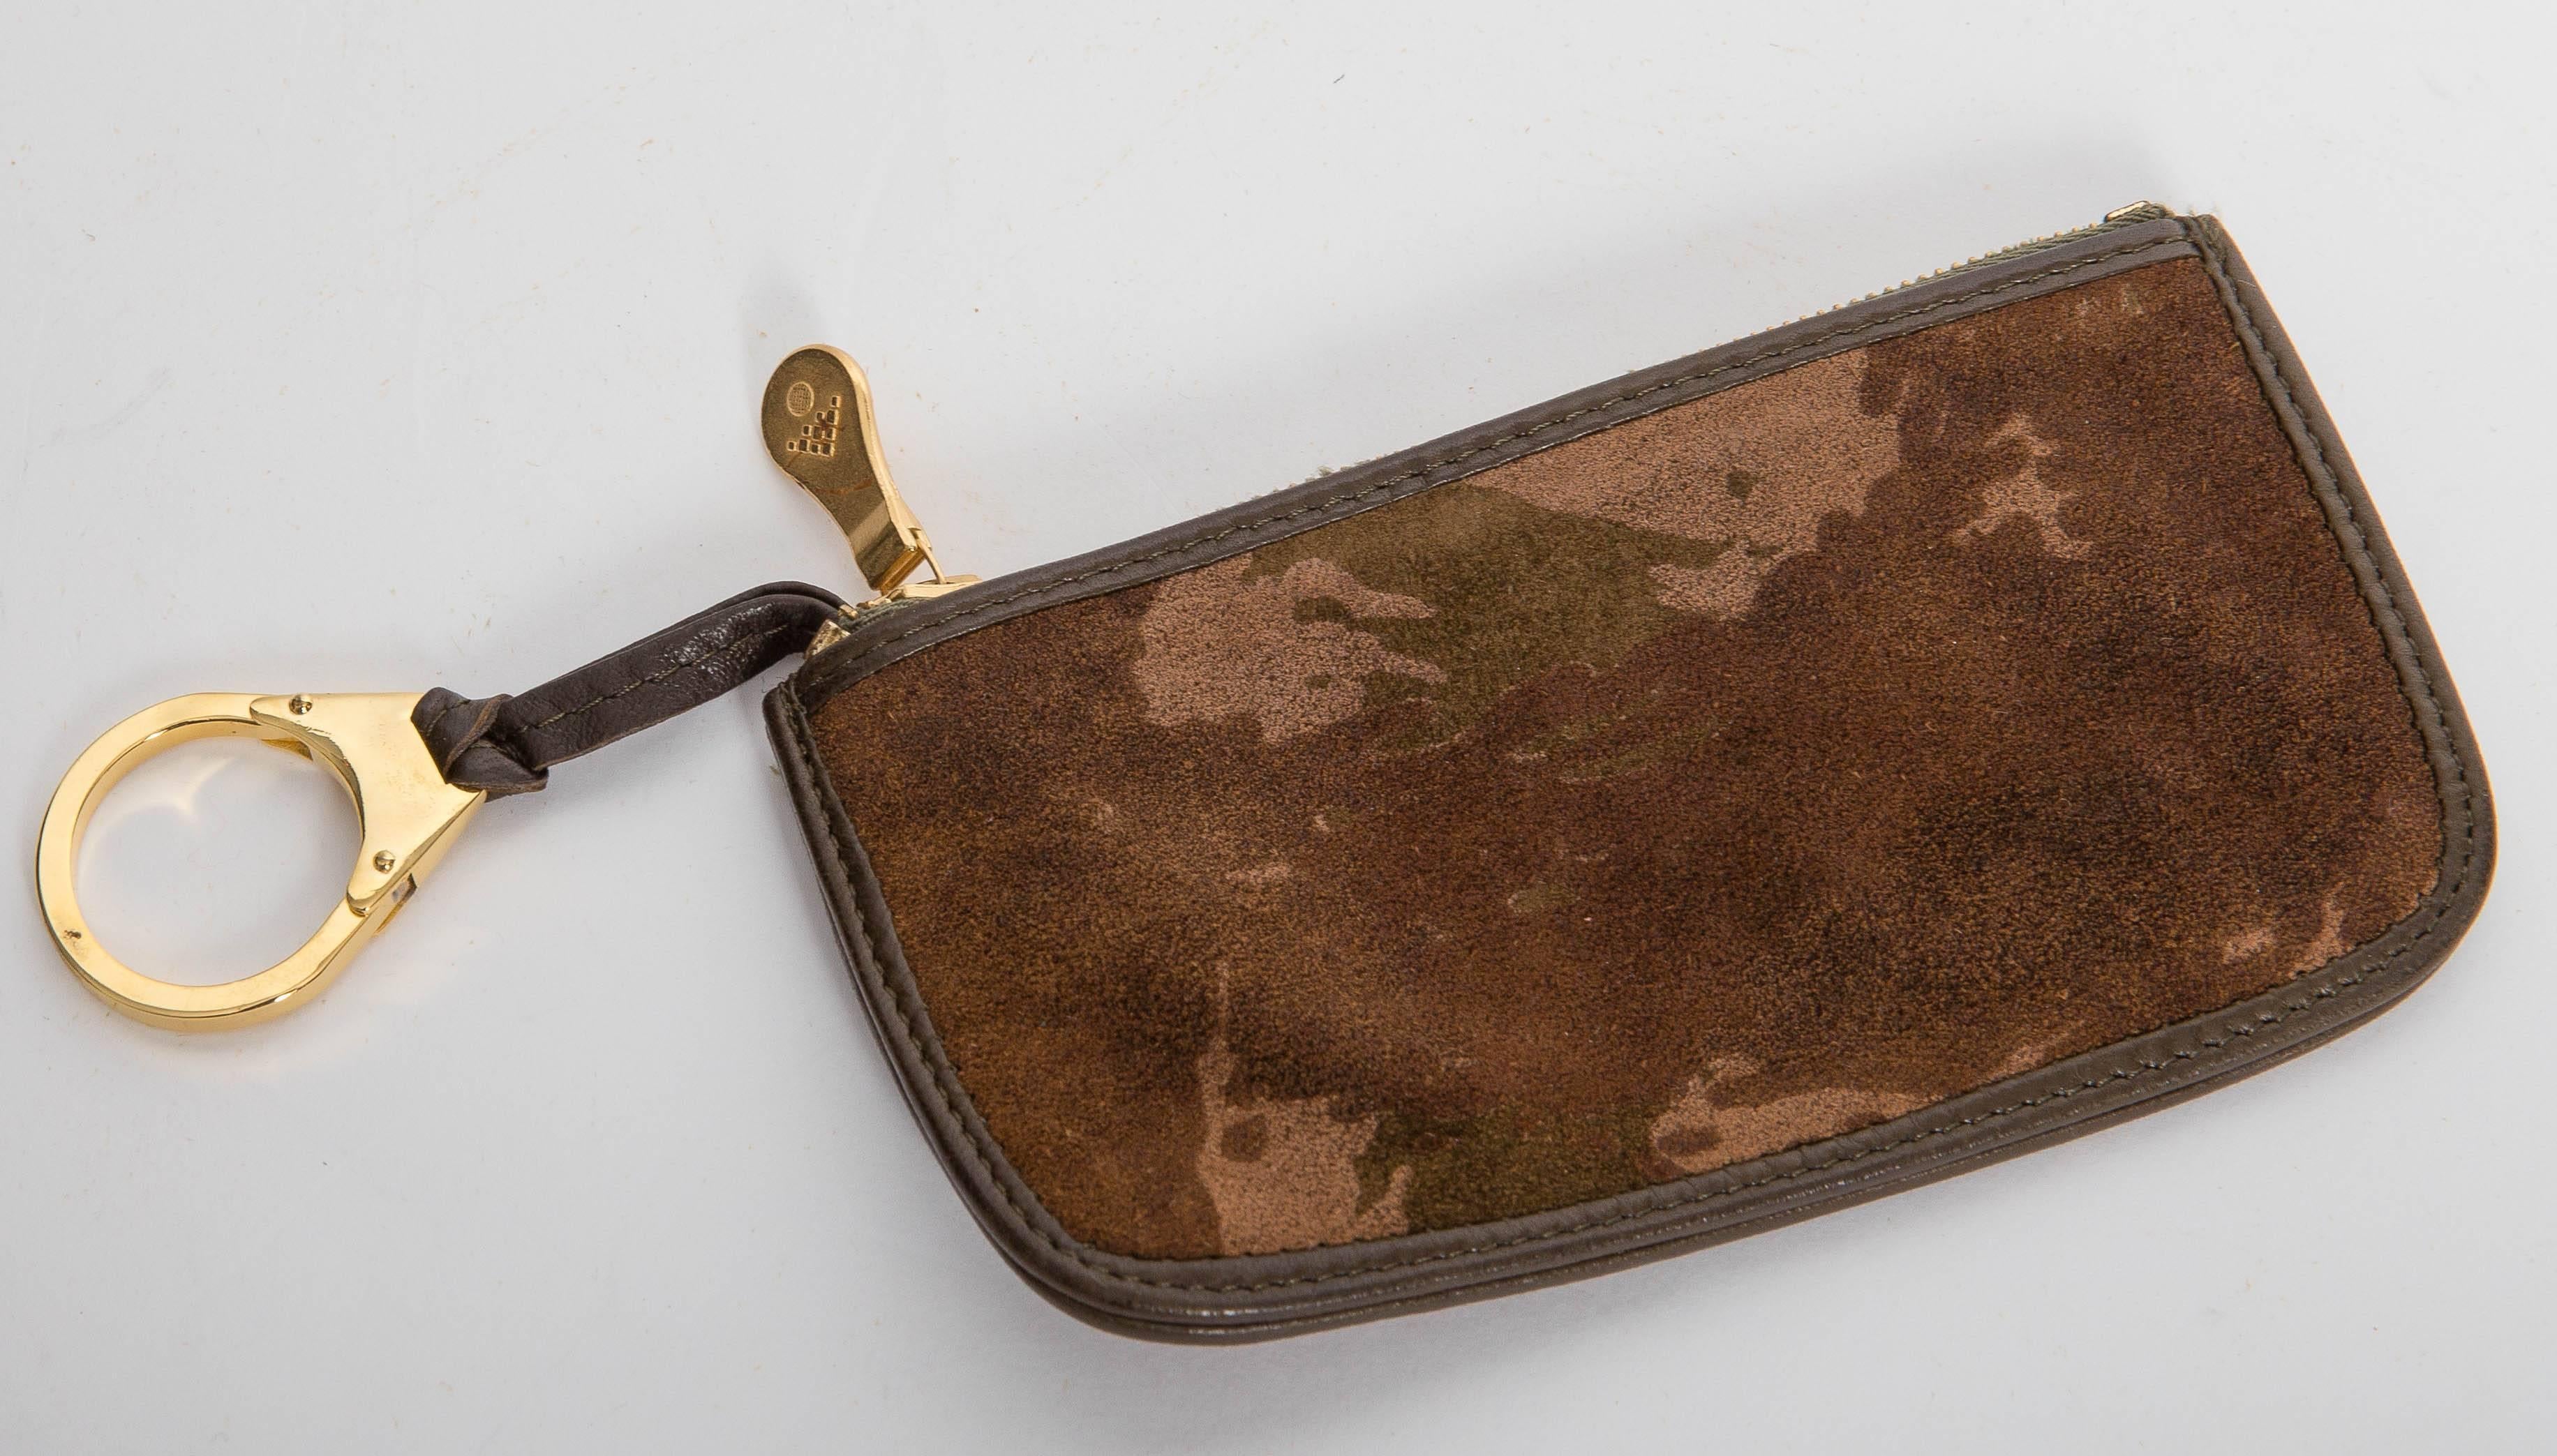 Fantastic Bottega Veneta Camouflage Suede Key Ring / Credit Card Holder. Concition is excellent. Features a leather toggle with brass key ring on the inside of the case. Lined in leather with leather trim and brass pull. 
This piece is part of a